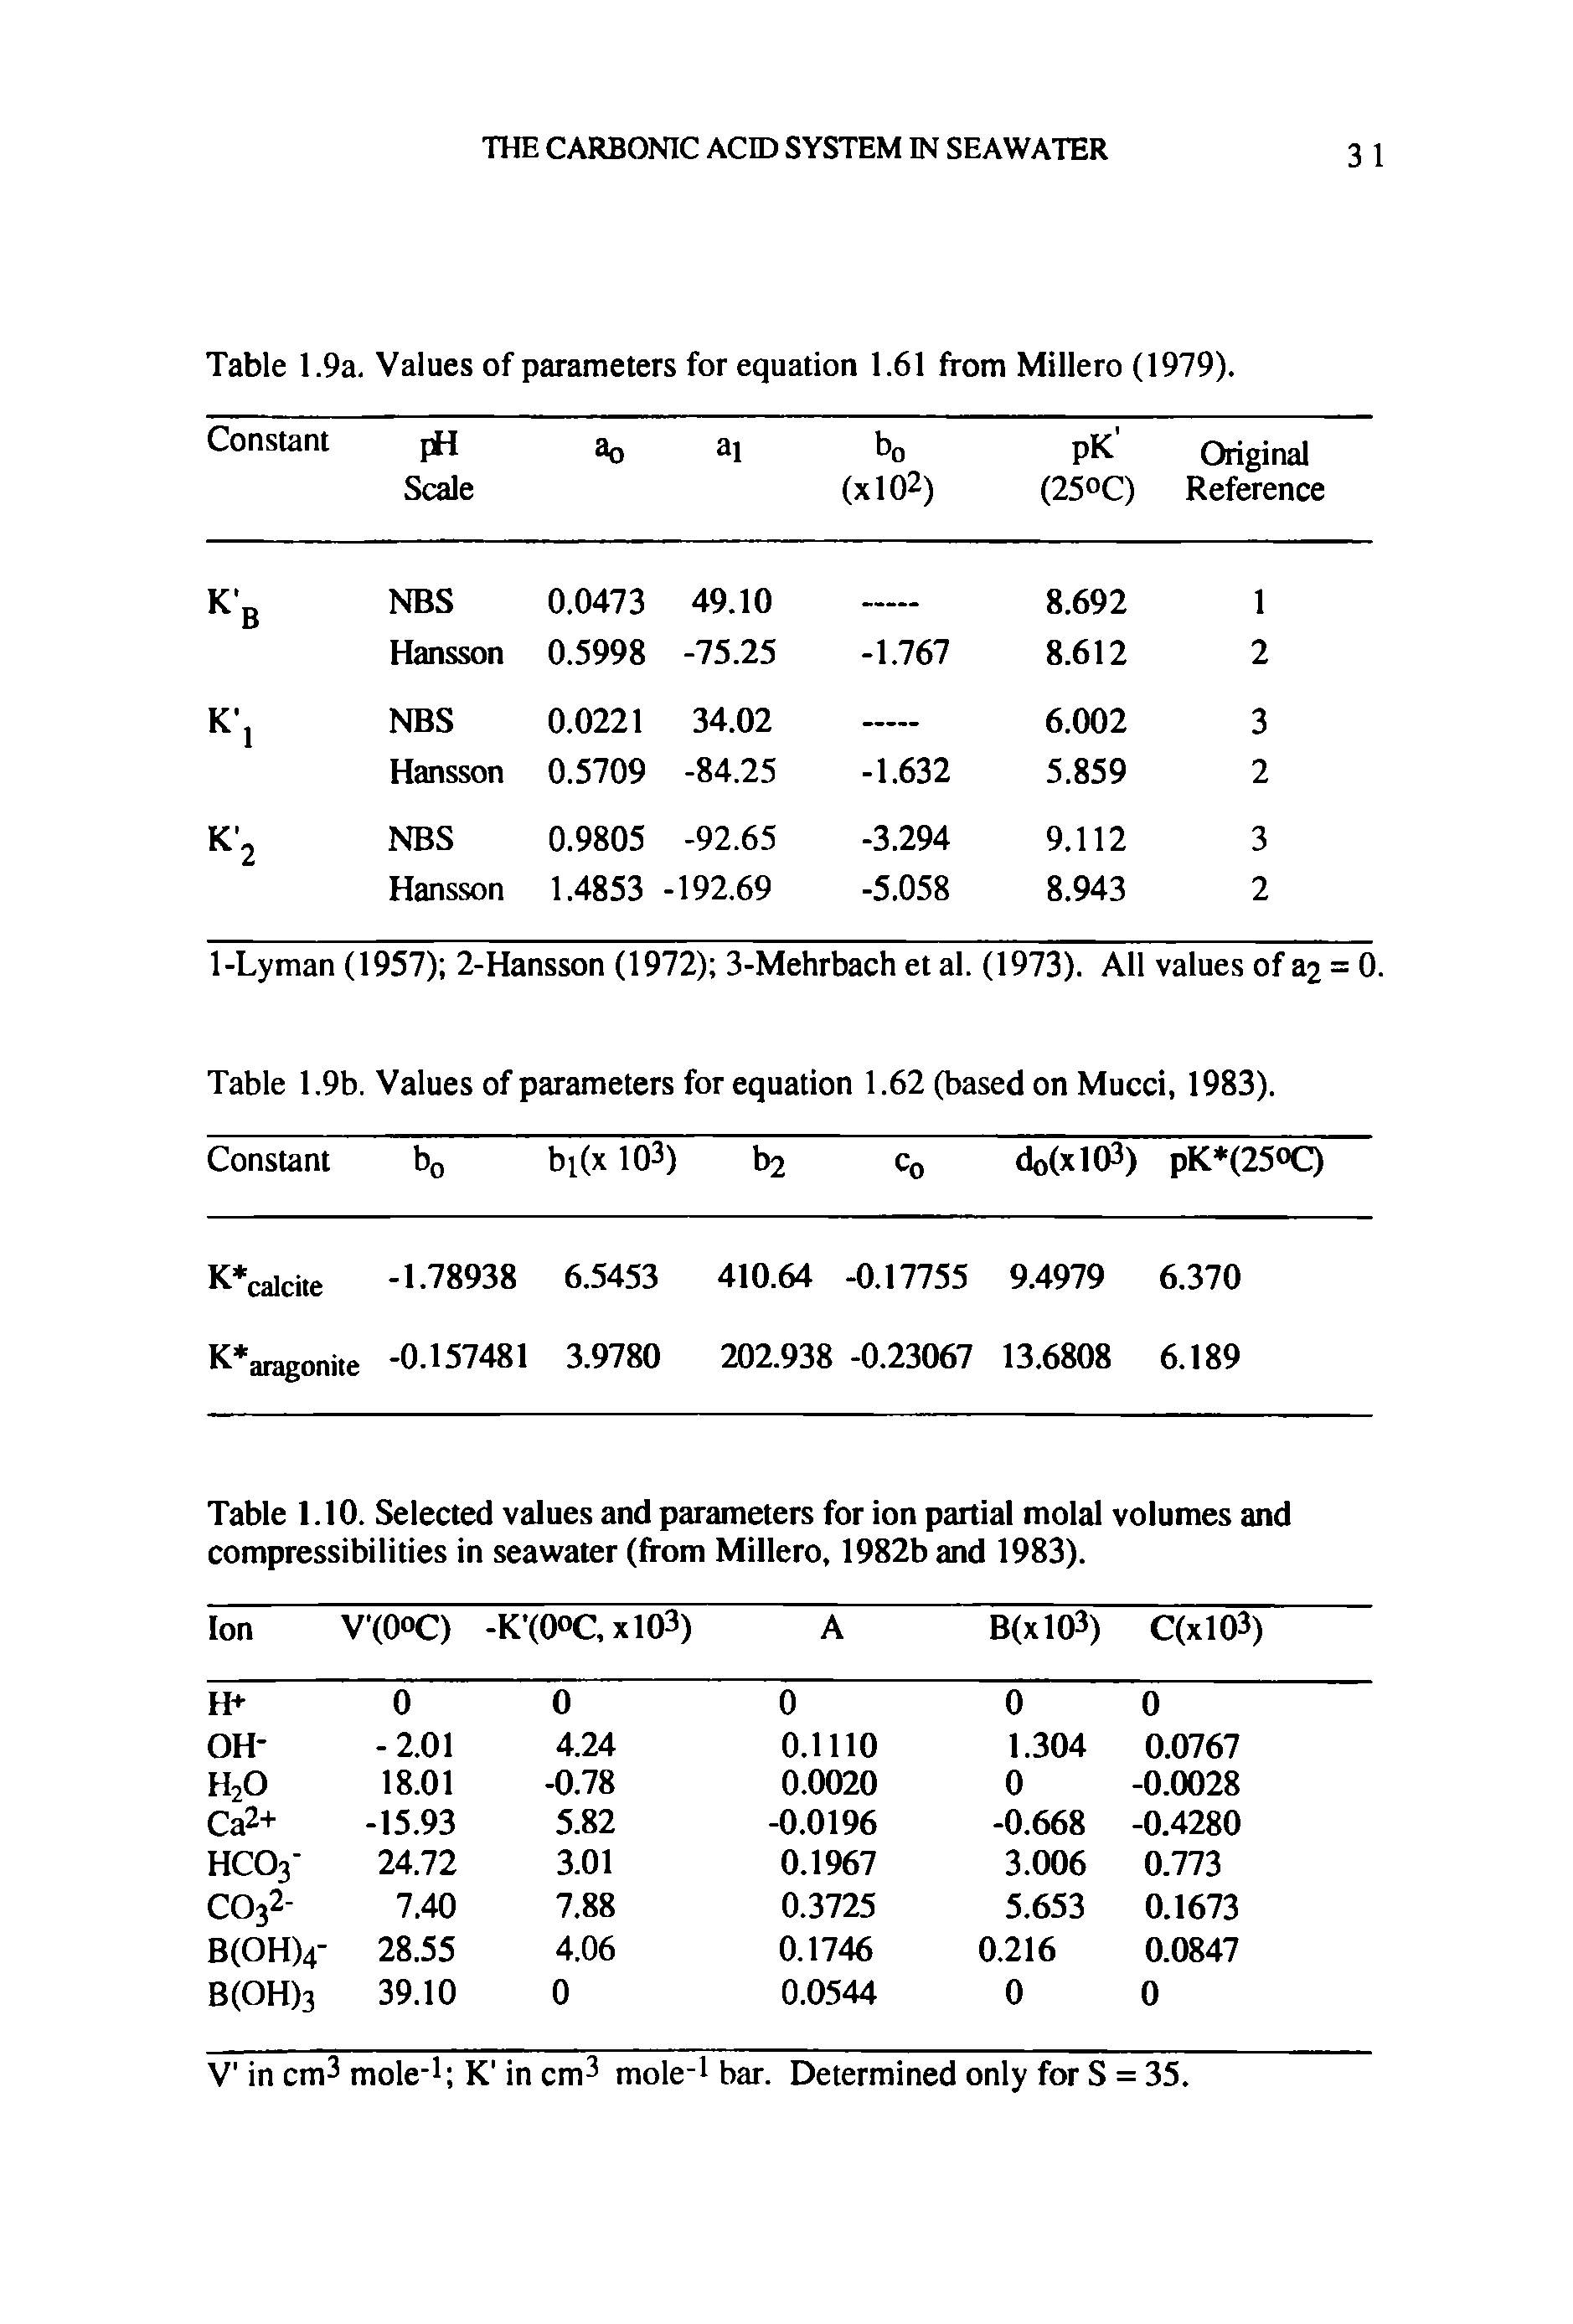 Table 1.10. Selected values and parameters for ion partial molal volumes and compressibilities in seawater (from Millero, 1982b and 1983).